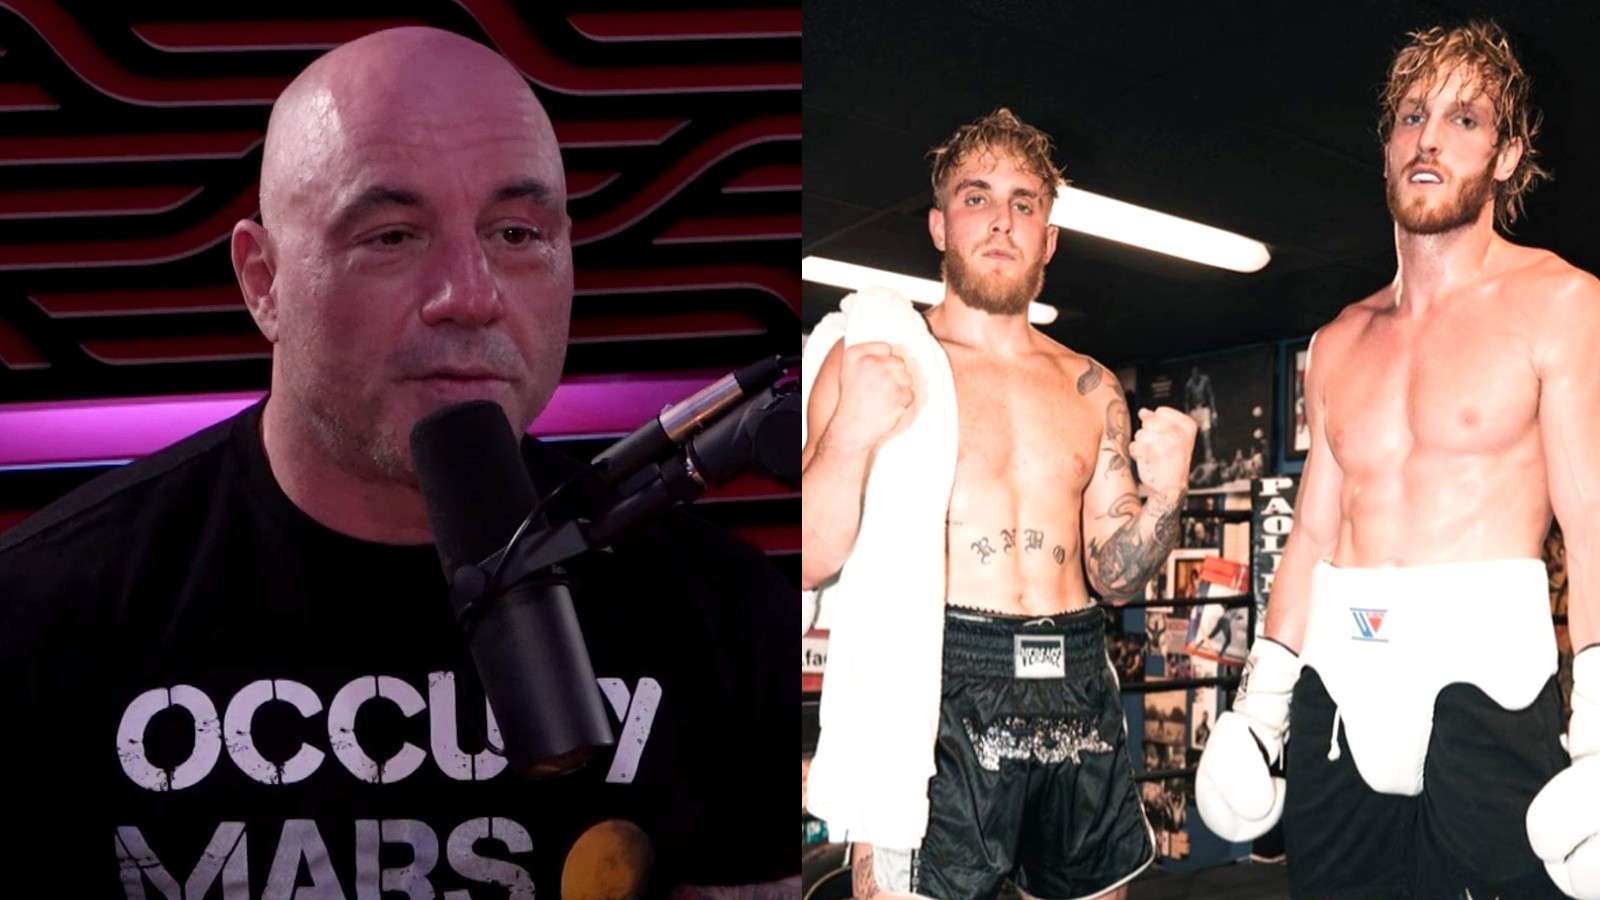 Joe Rogan on his podcast next to image of Paul brothers in training gear